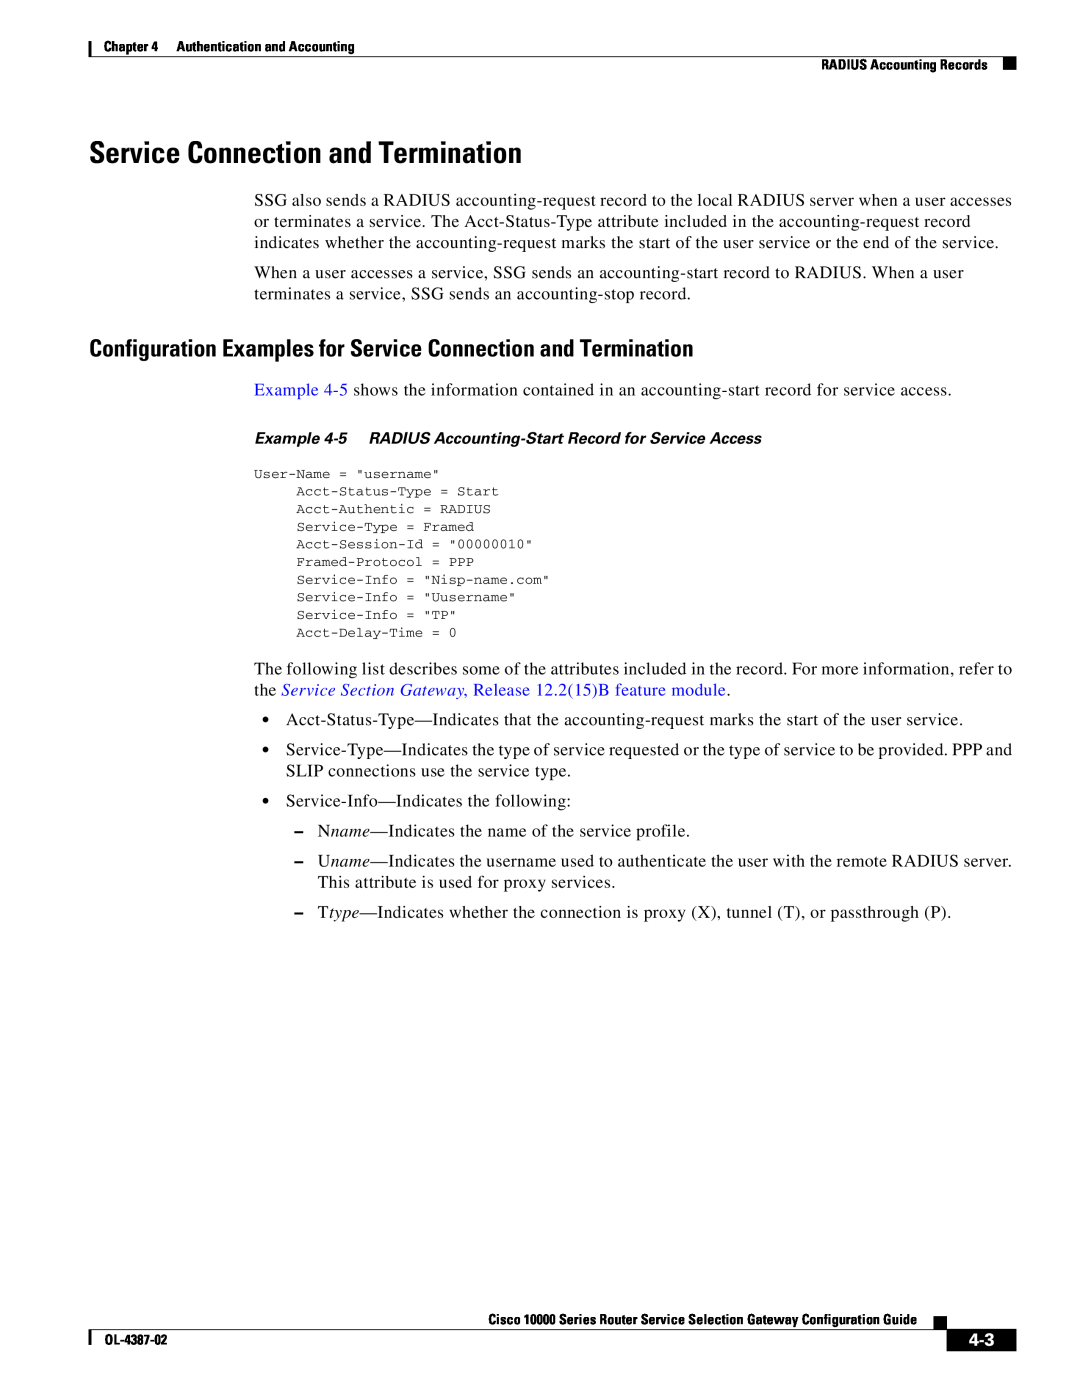 Cisco Systems OL-4387-02 manual Configuration Examples for Service Connection and Termination 